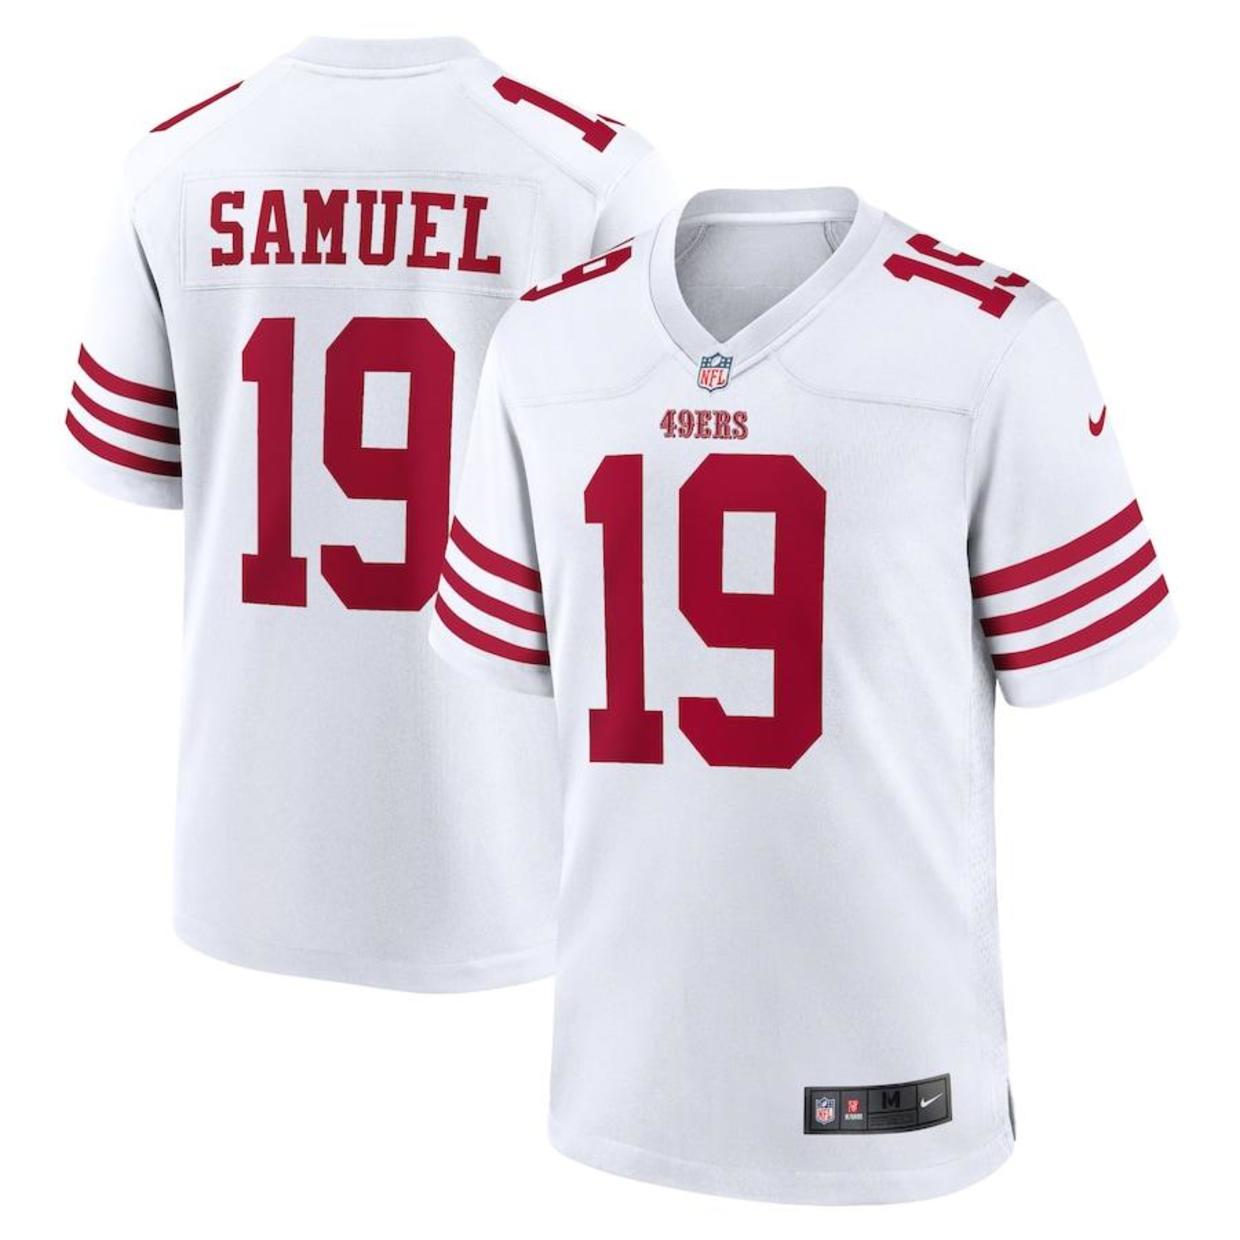 The top 10 NFL jerseys of 2022: The most popular football players of ...